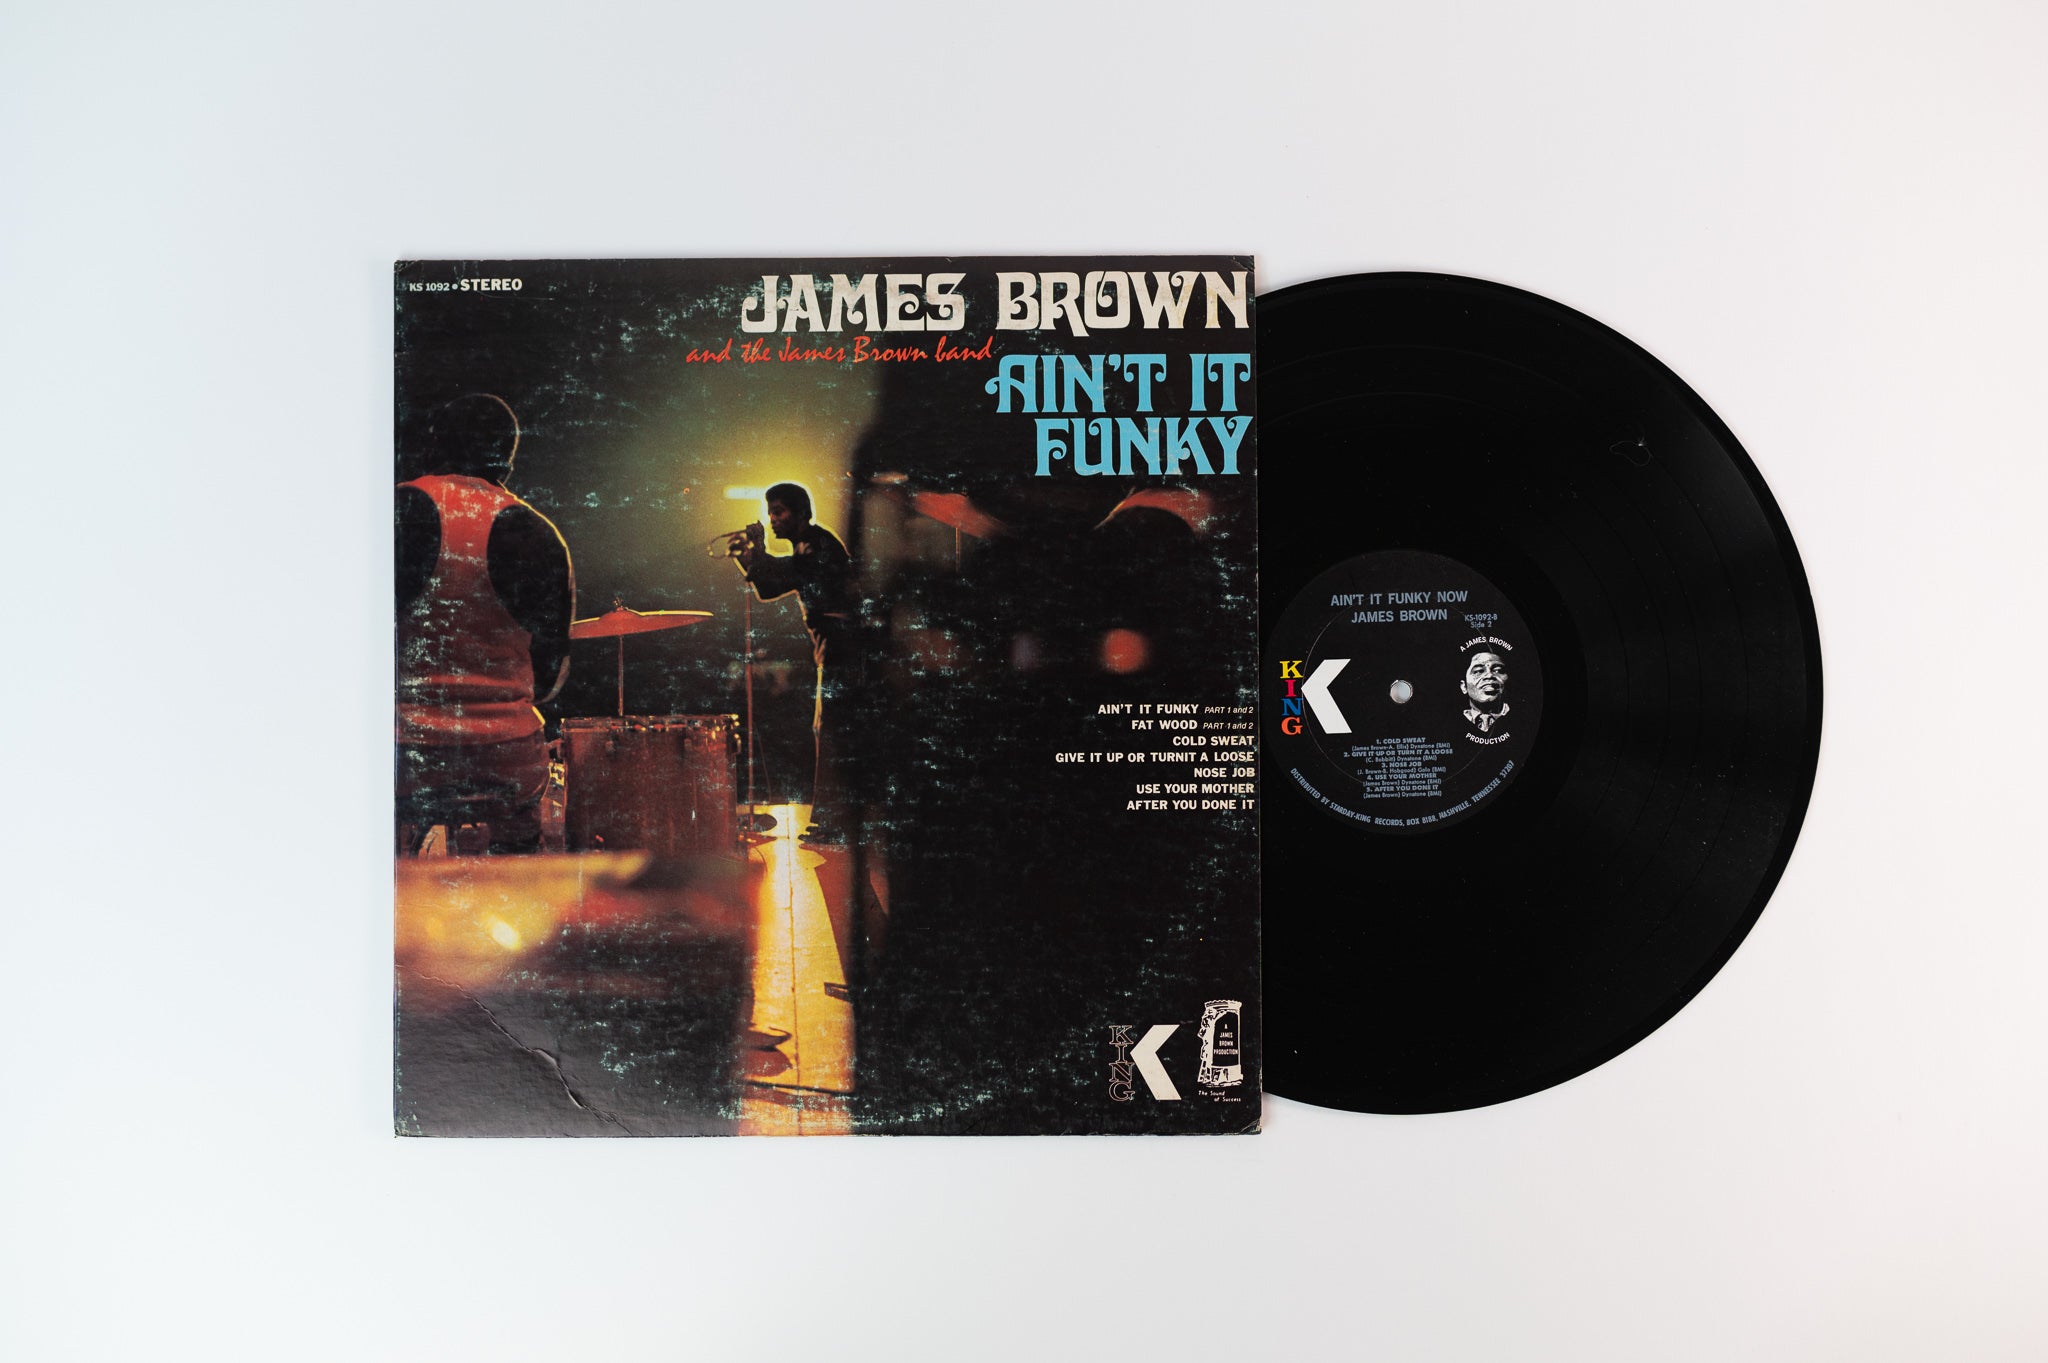 James Brown - Ain't It Funky on King